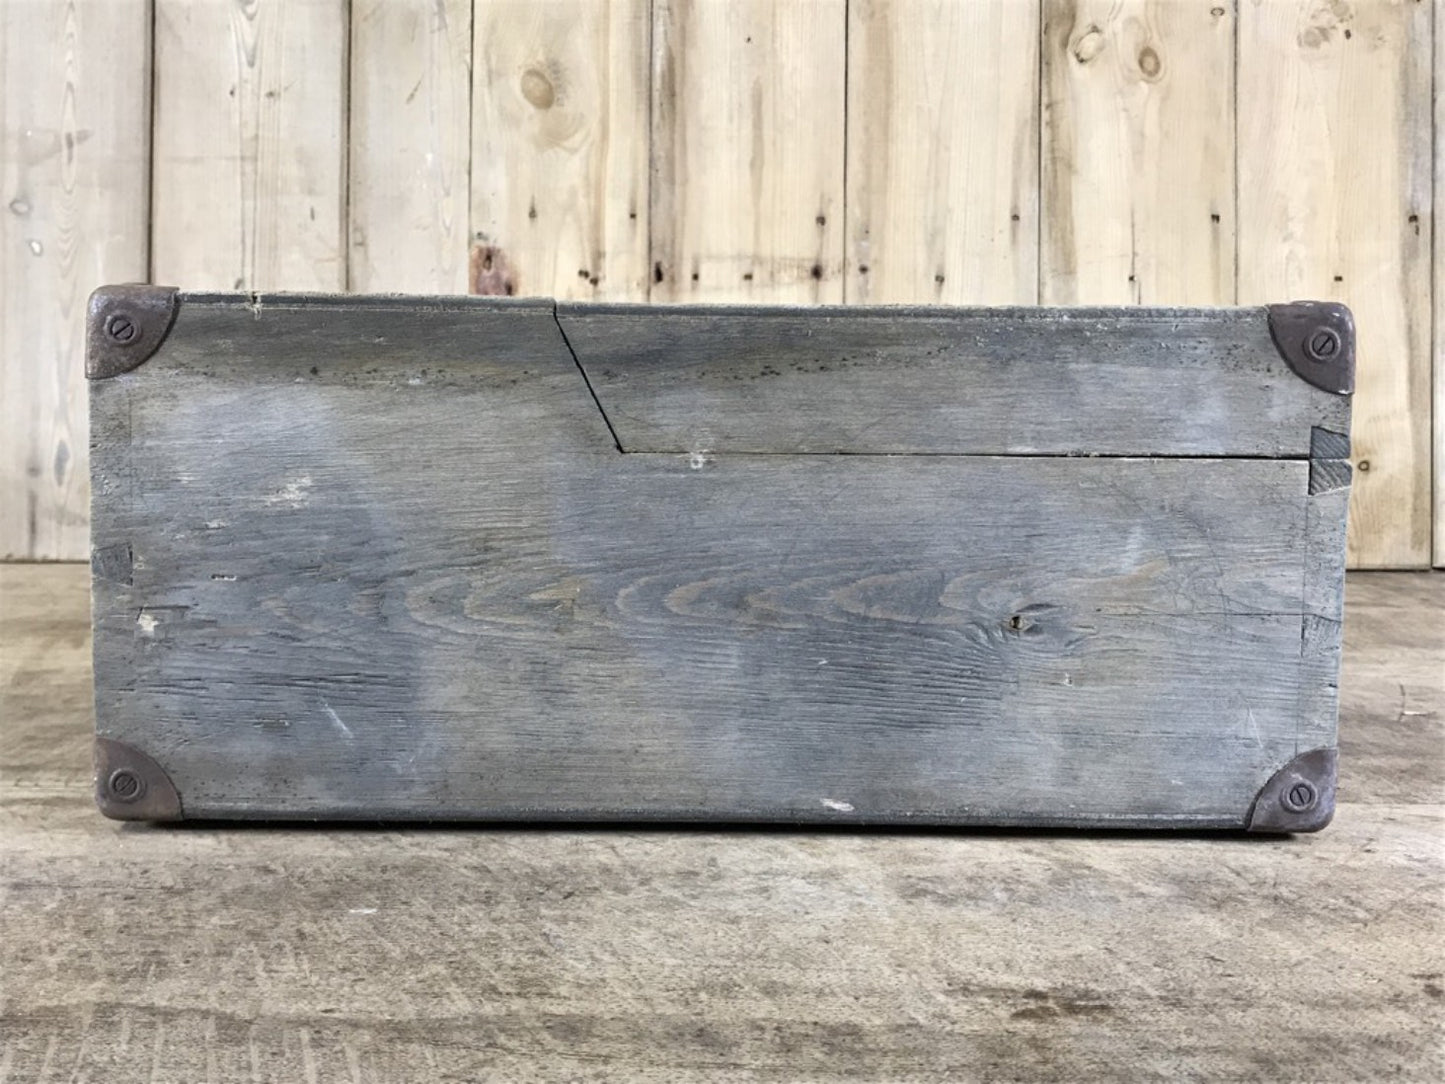 Reclaimed Stripped Pine & Ply Old Fashioned Tool Storage Box